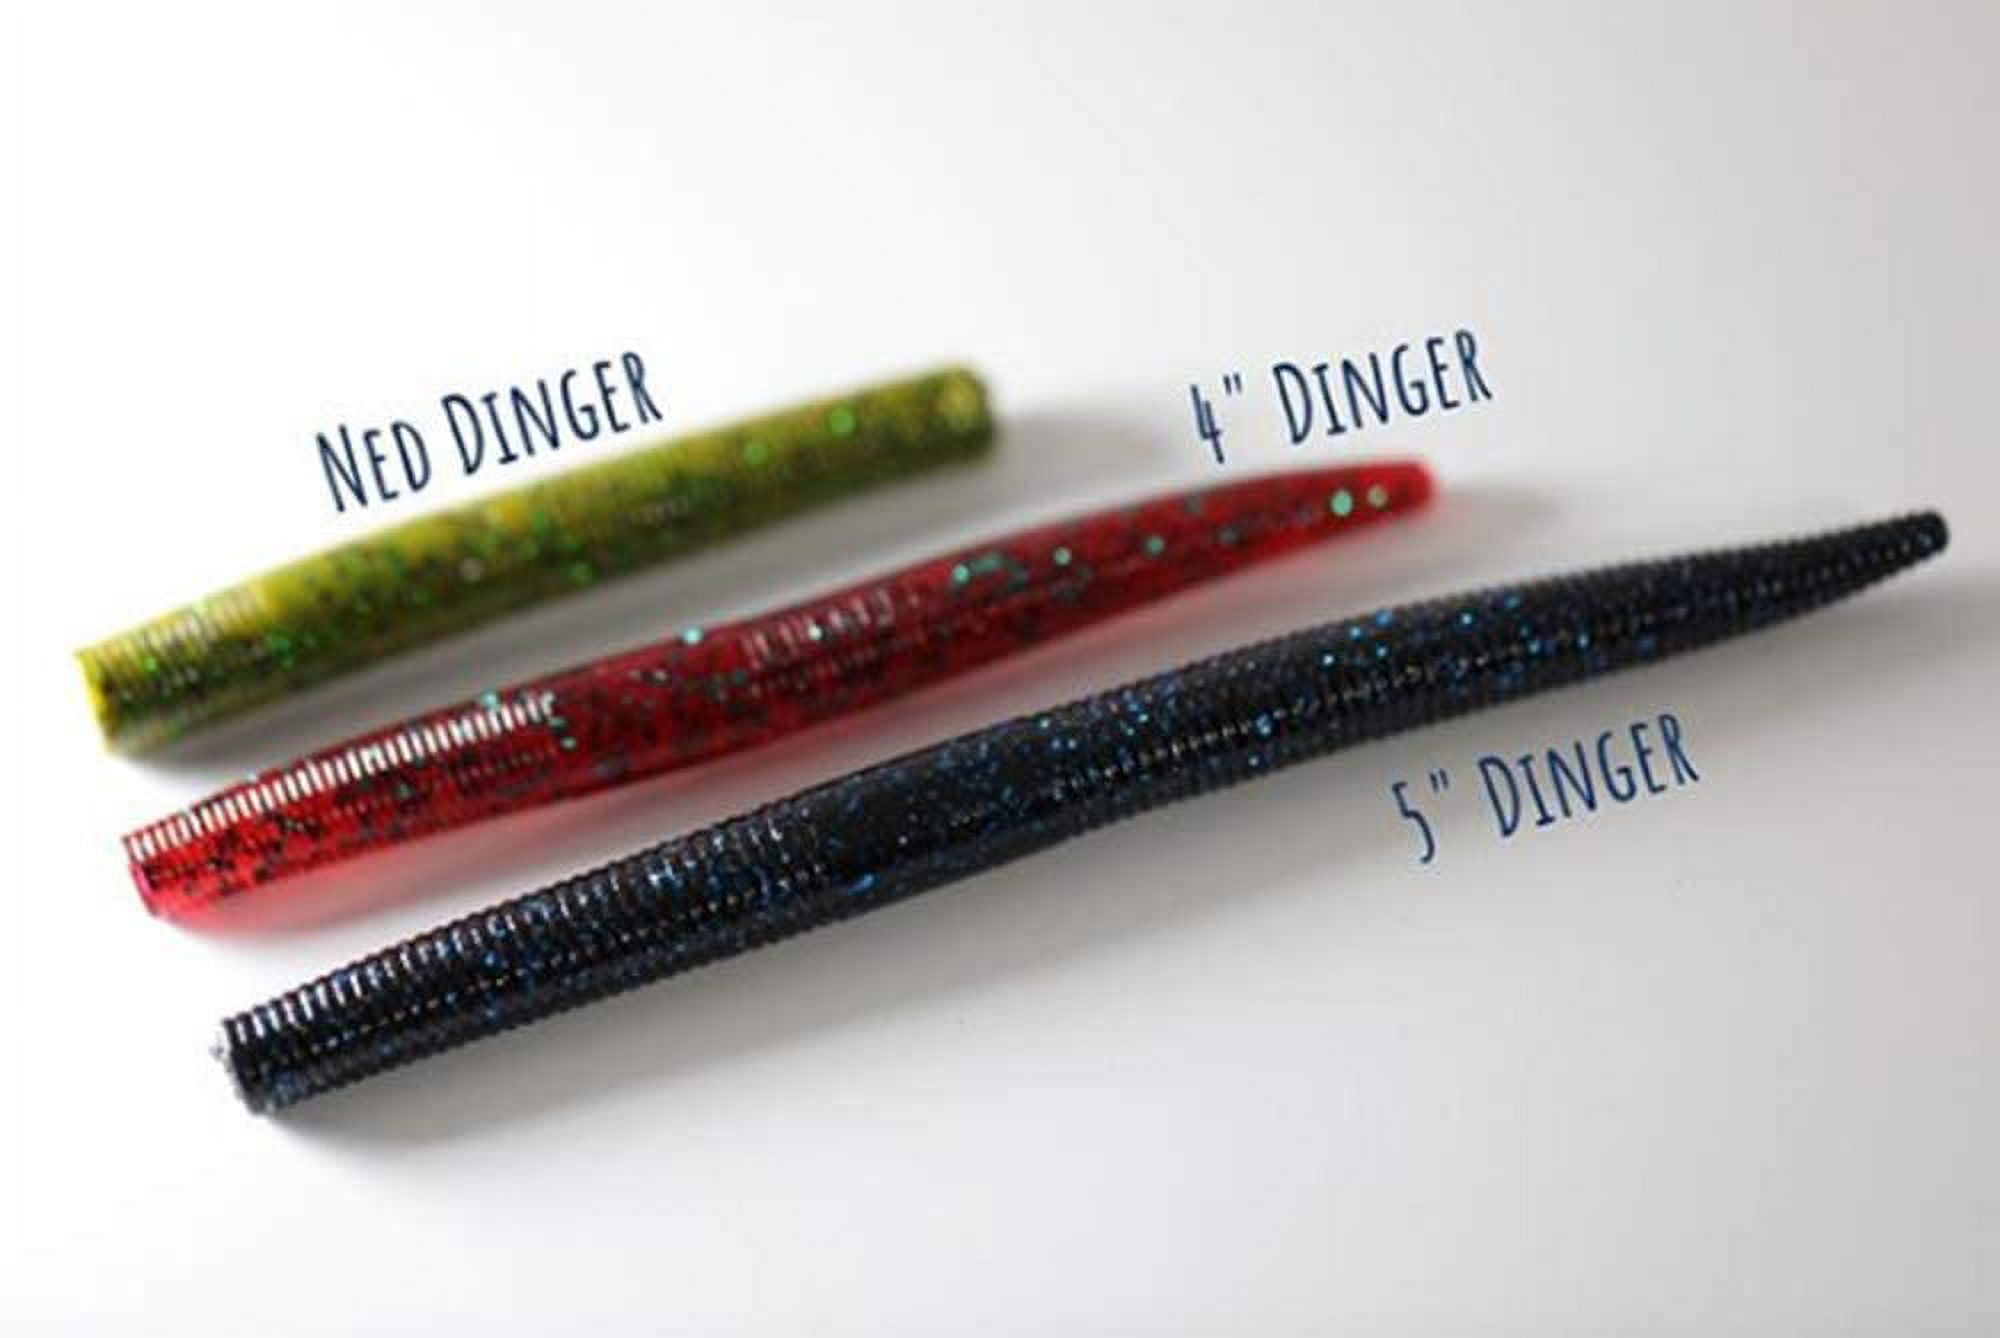 YUM Dinger Fishing Lure Soft bait Worm Camo 5 in 